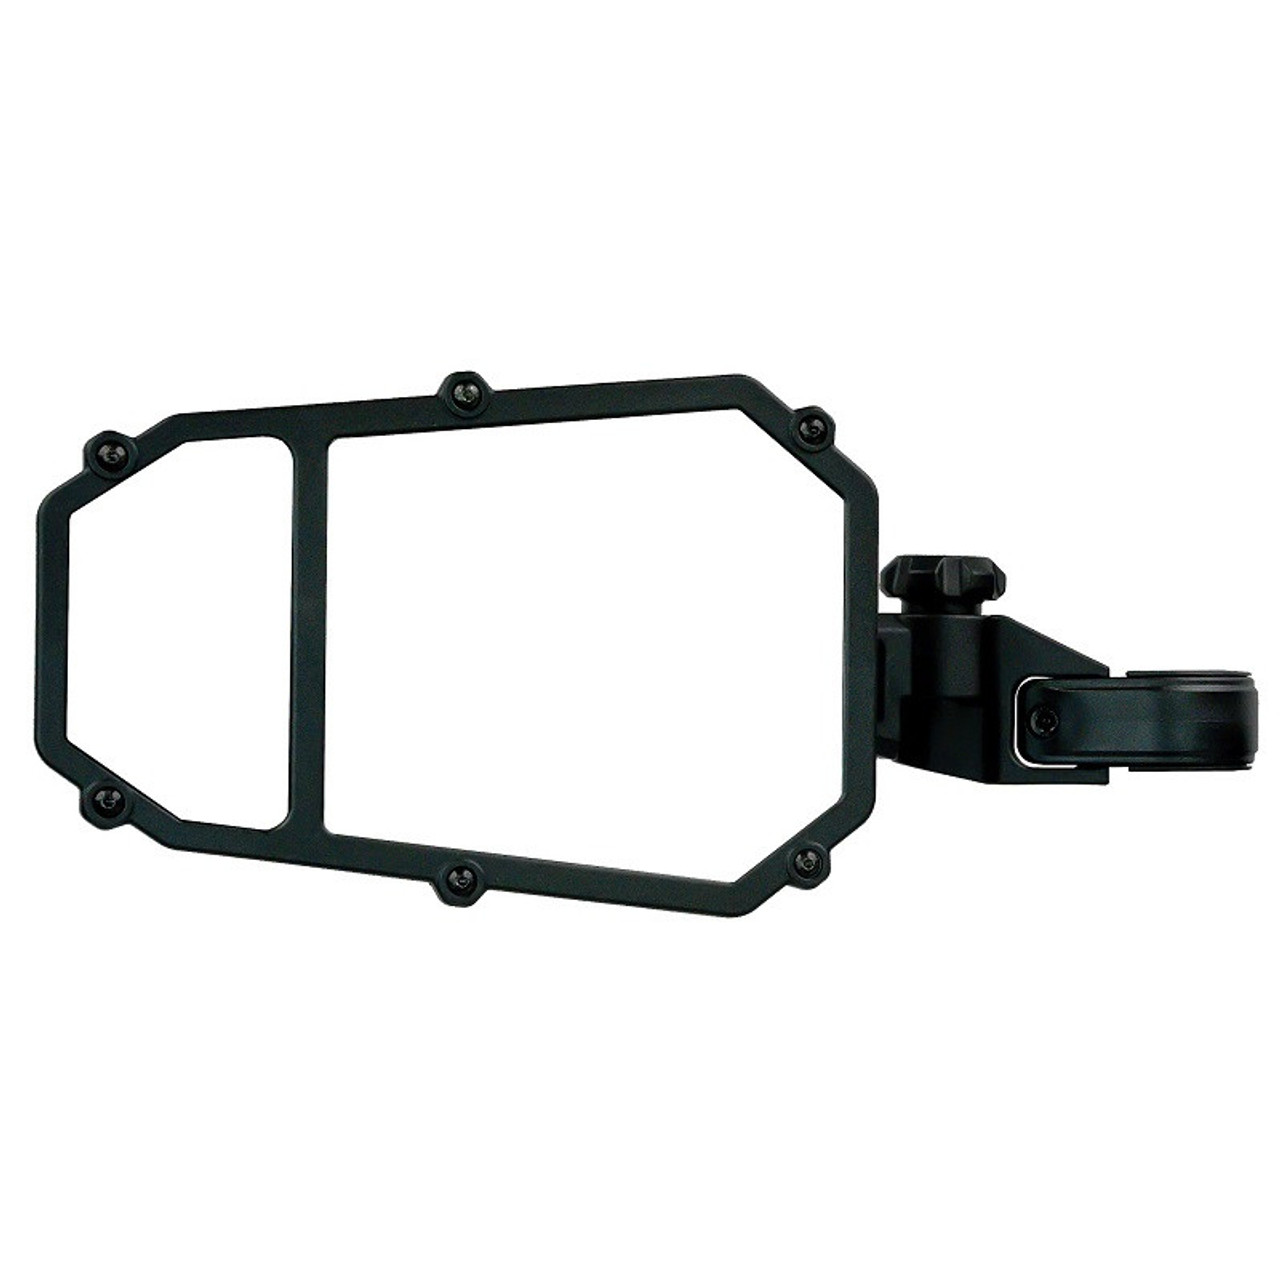 CLEARVIEW™ UTV SIDEVIEW MIRROR - 2 PACK